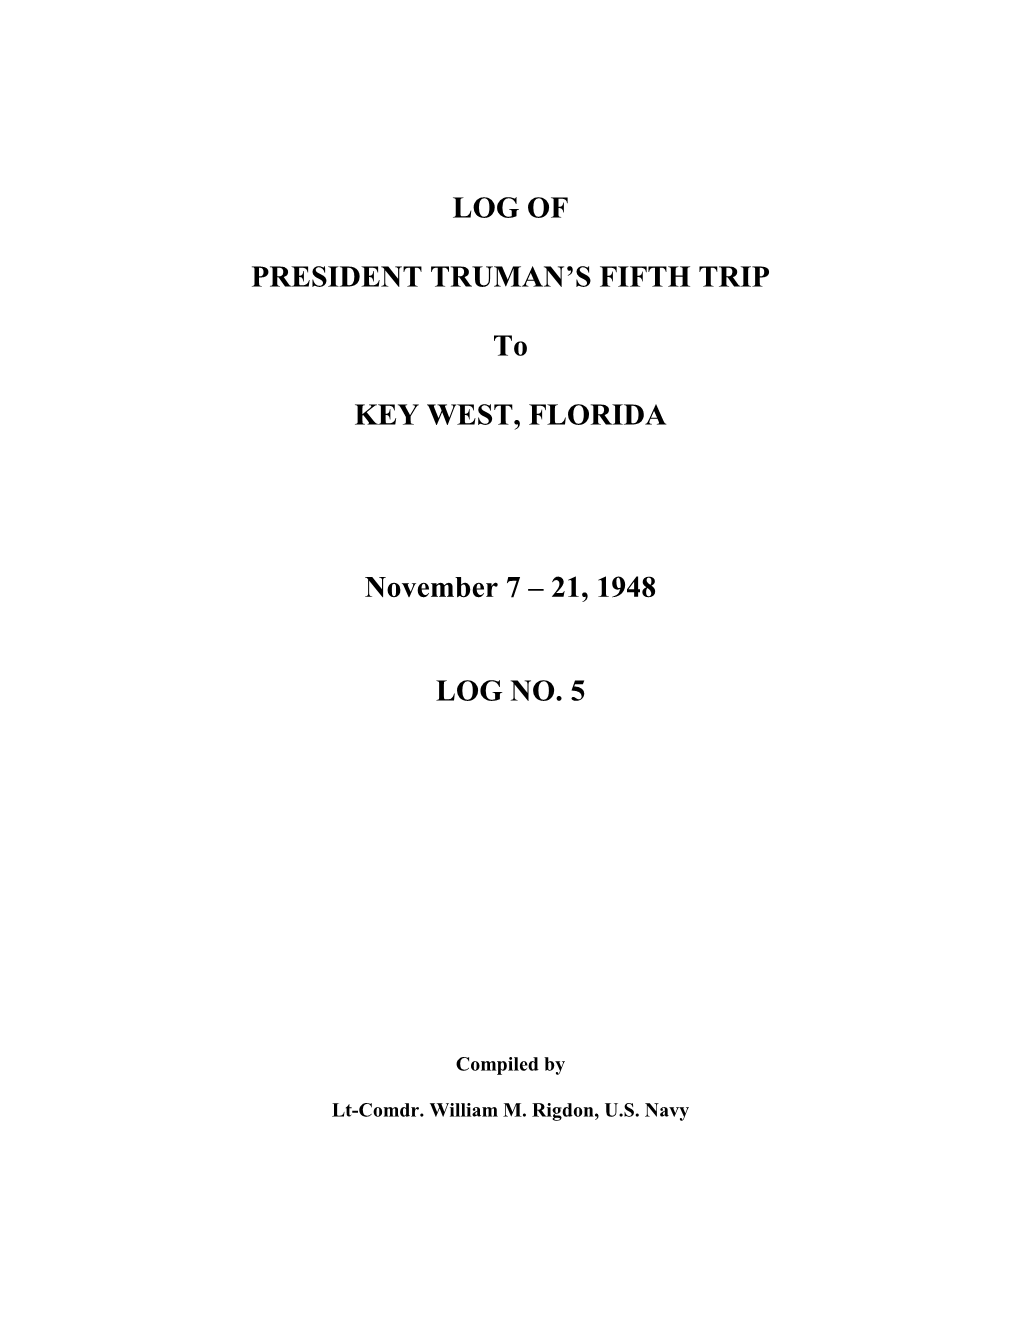 LOG of PRESIDENT TRUMAN's FIFTH TRIP to KEY WEST